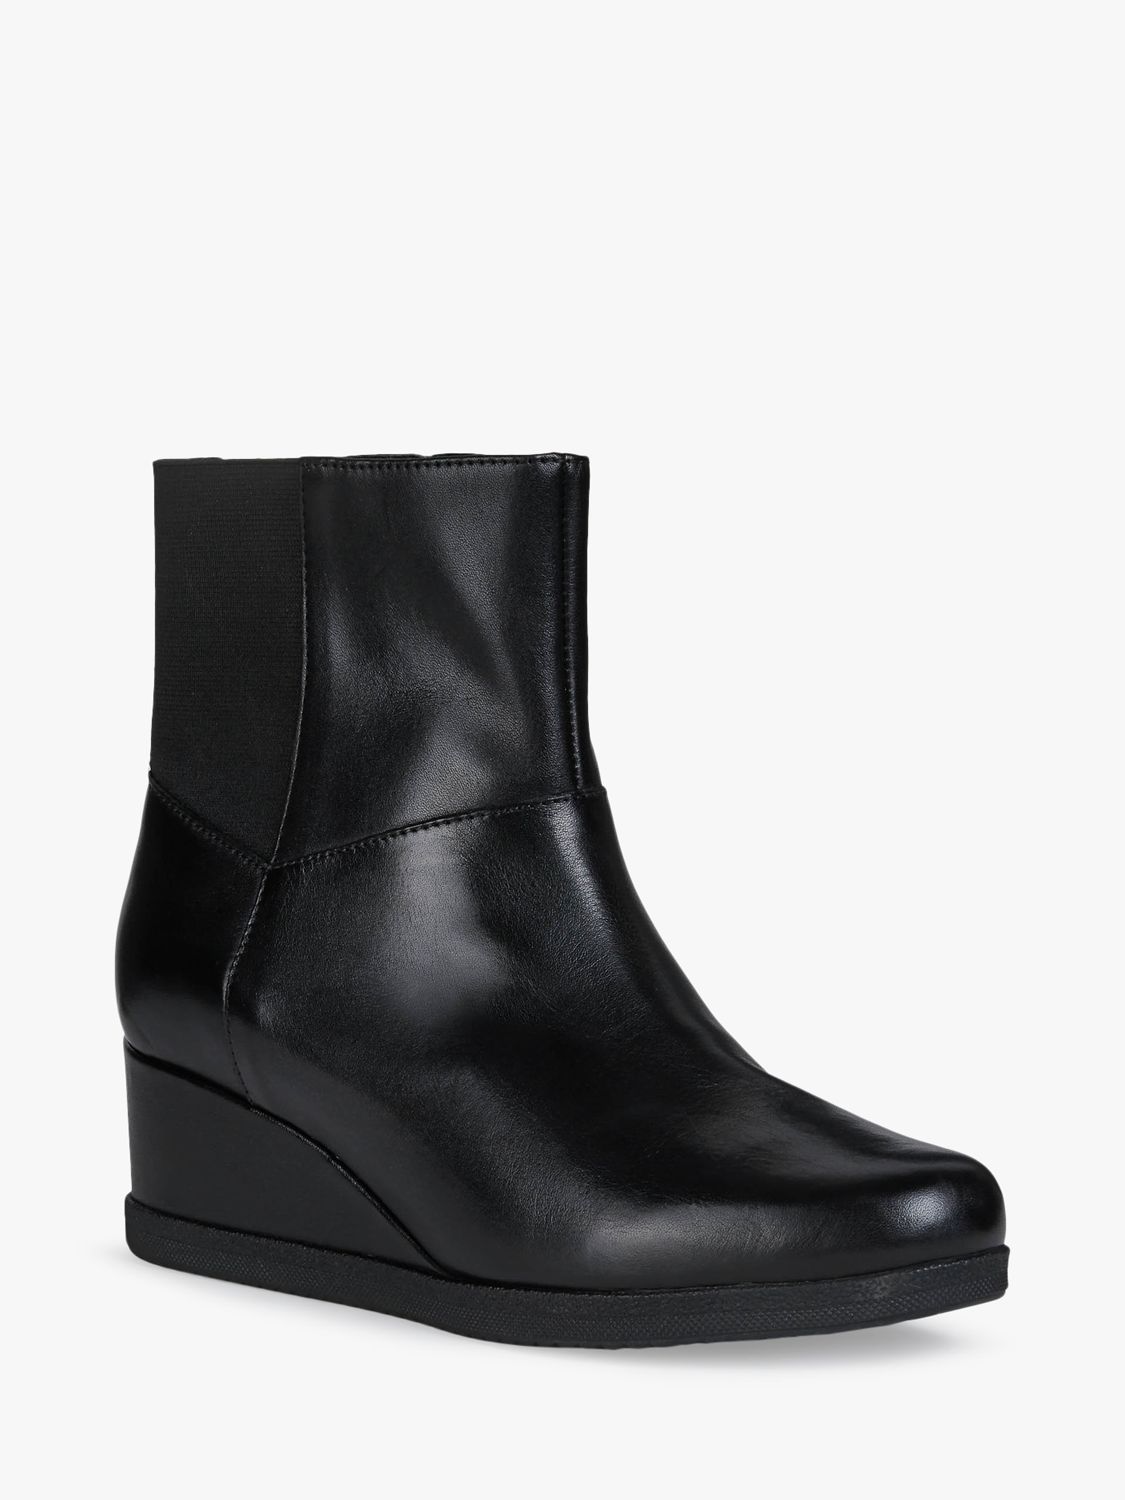 Women's Anylla Leather Wedge Heel Boots, Black at John Lewis & Partners